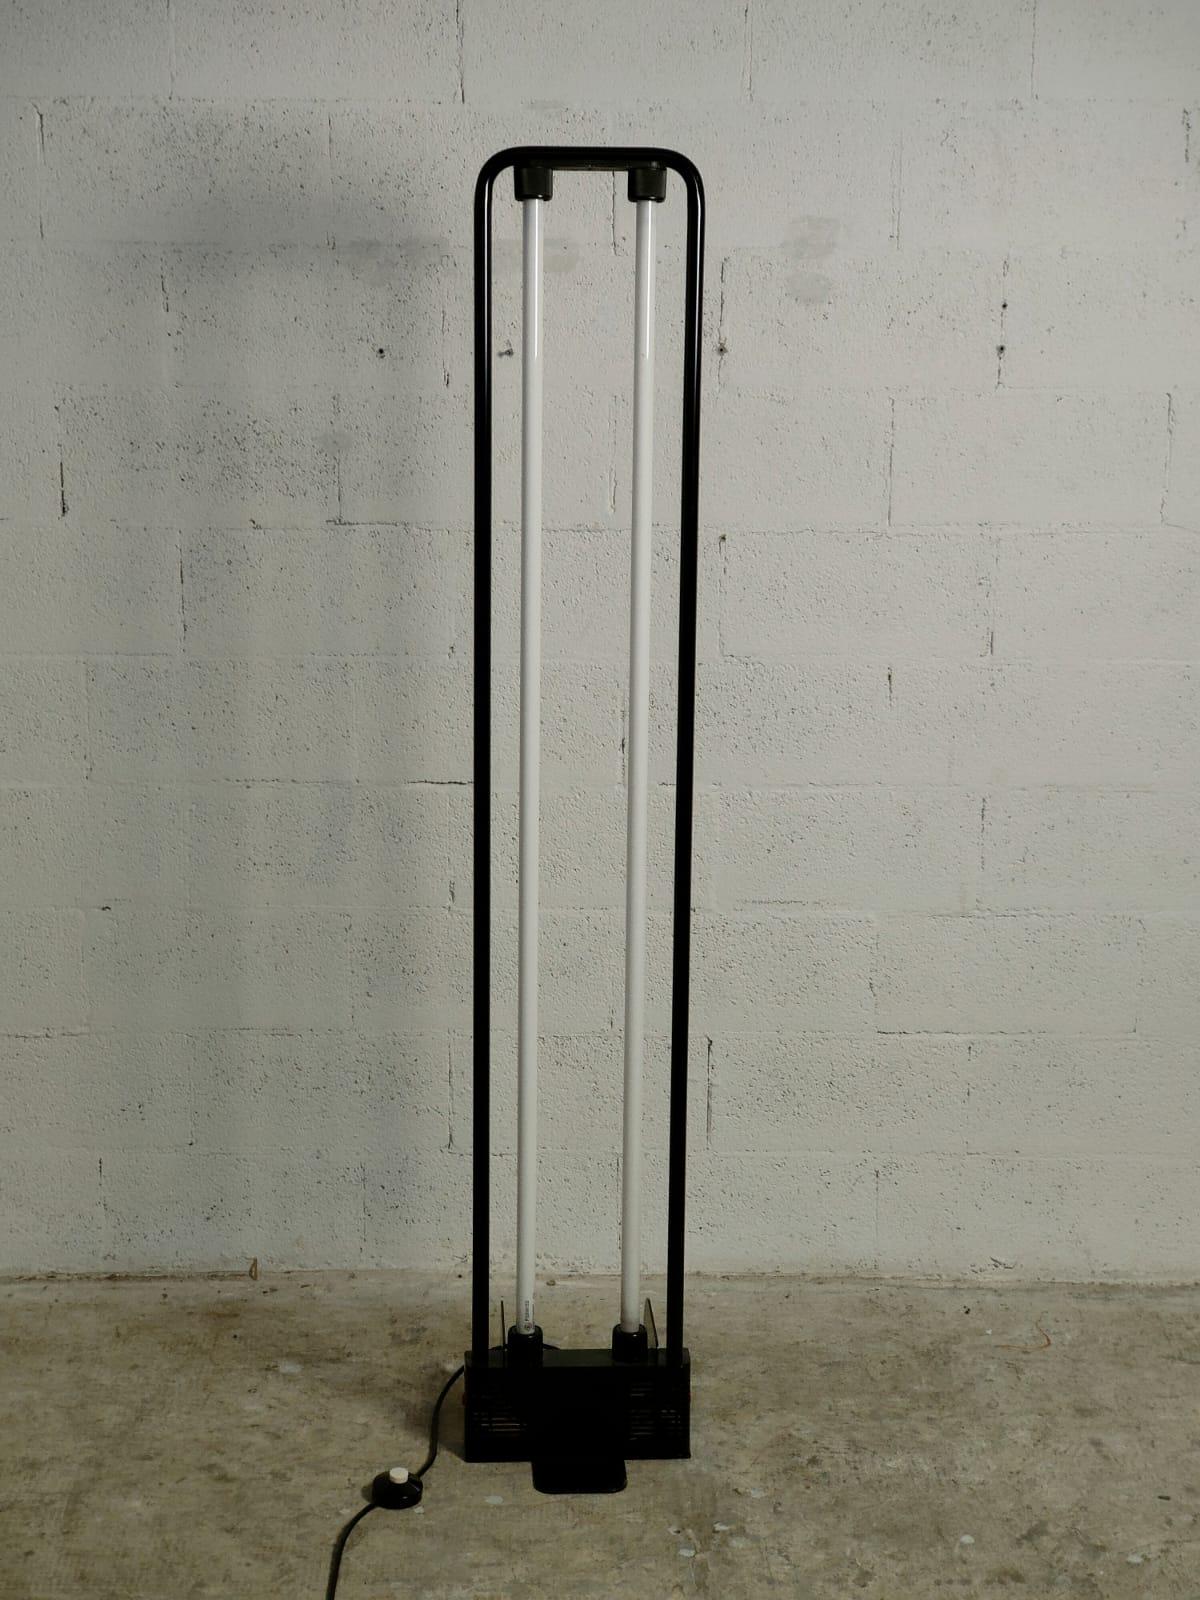 Modern floor lamp design by Gian Nicola Gigante, Marilena Boccato and Antonio Zambusi in 1981 for Zerbetto. 
Black lacquered metal structure with double neon, black metal base.
These lights are simplistic and geometric in their design and feature